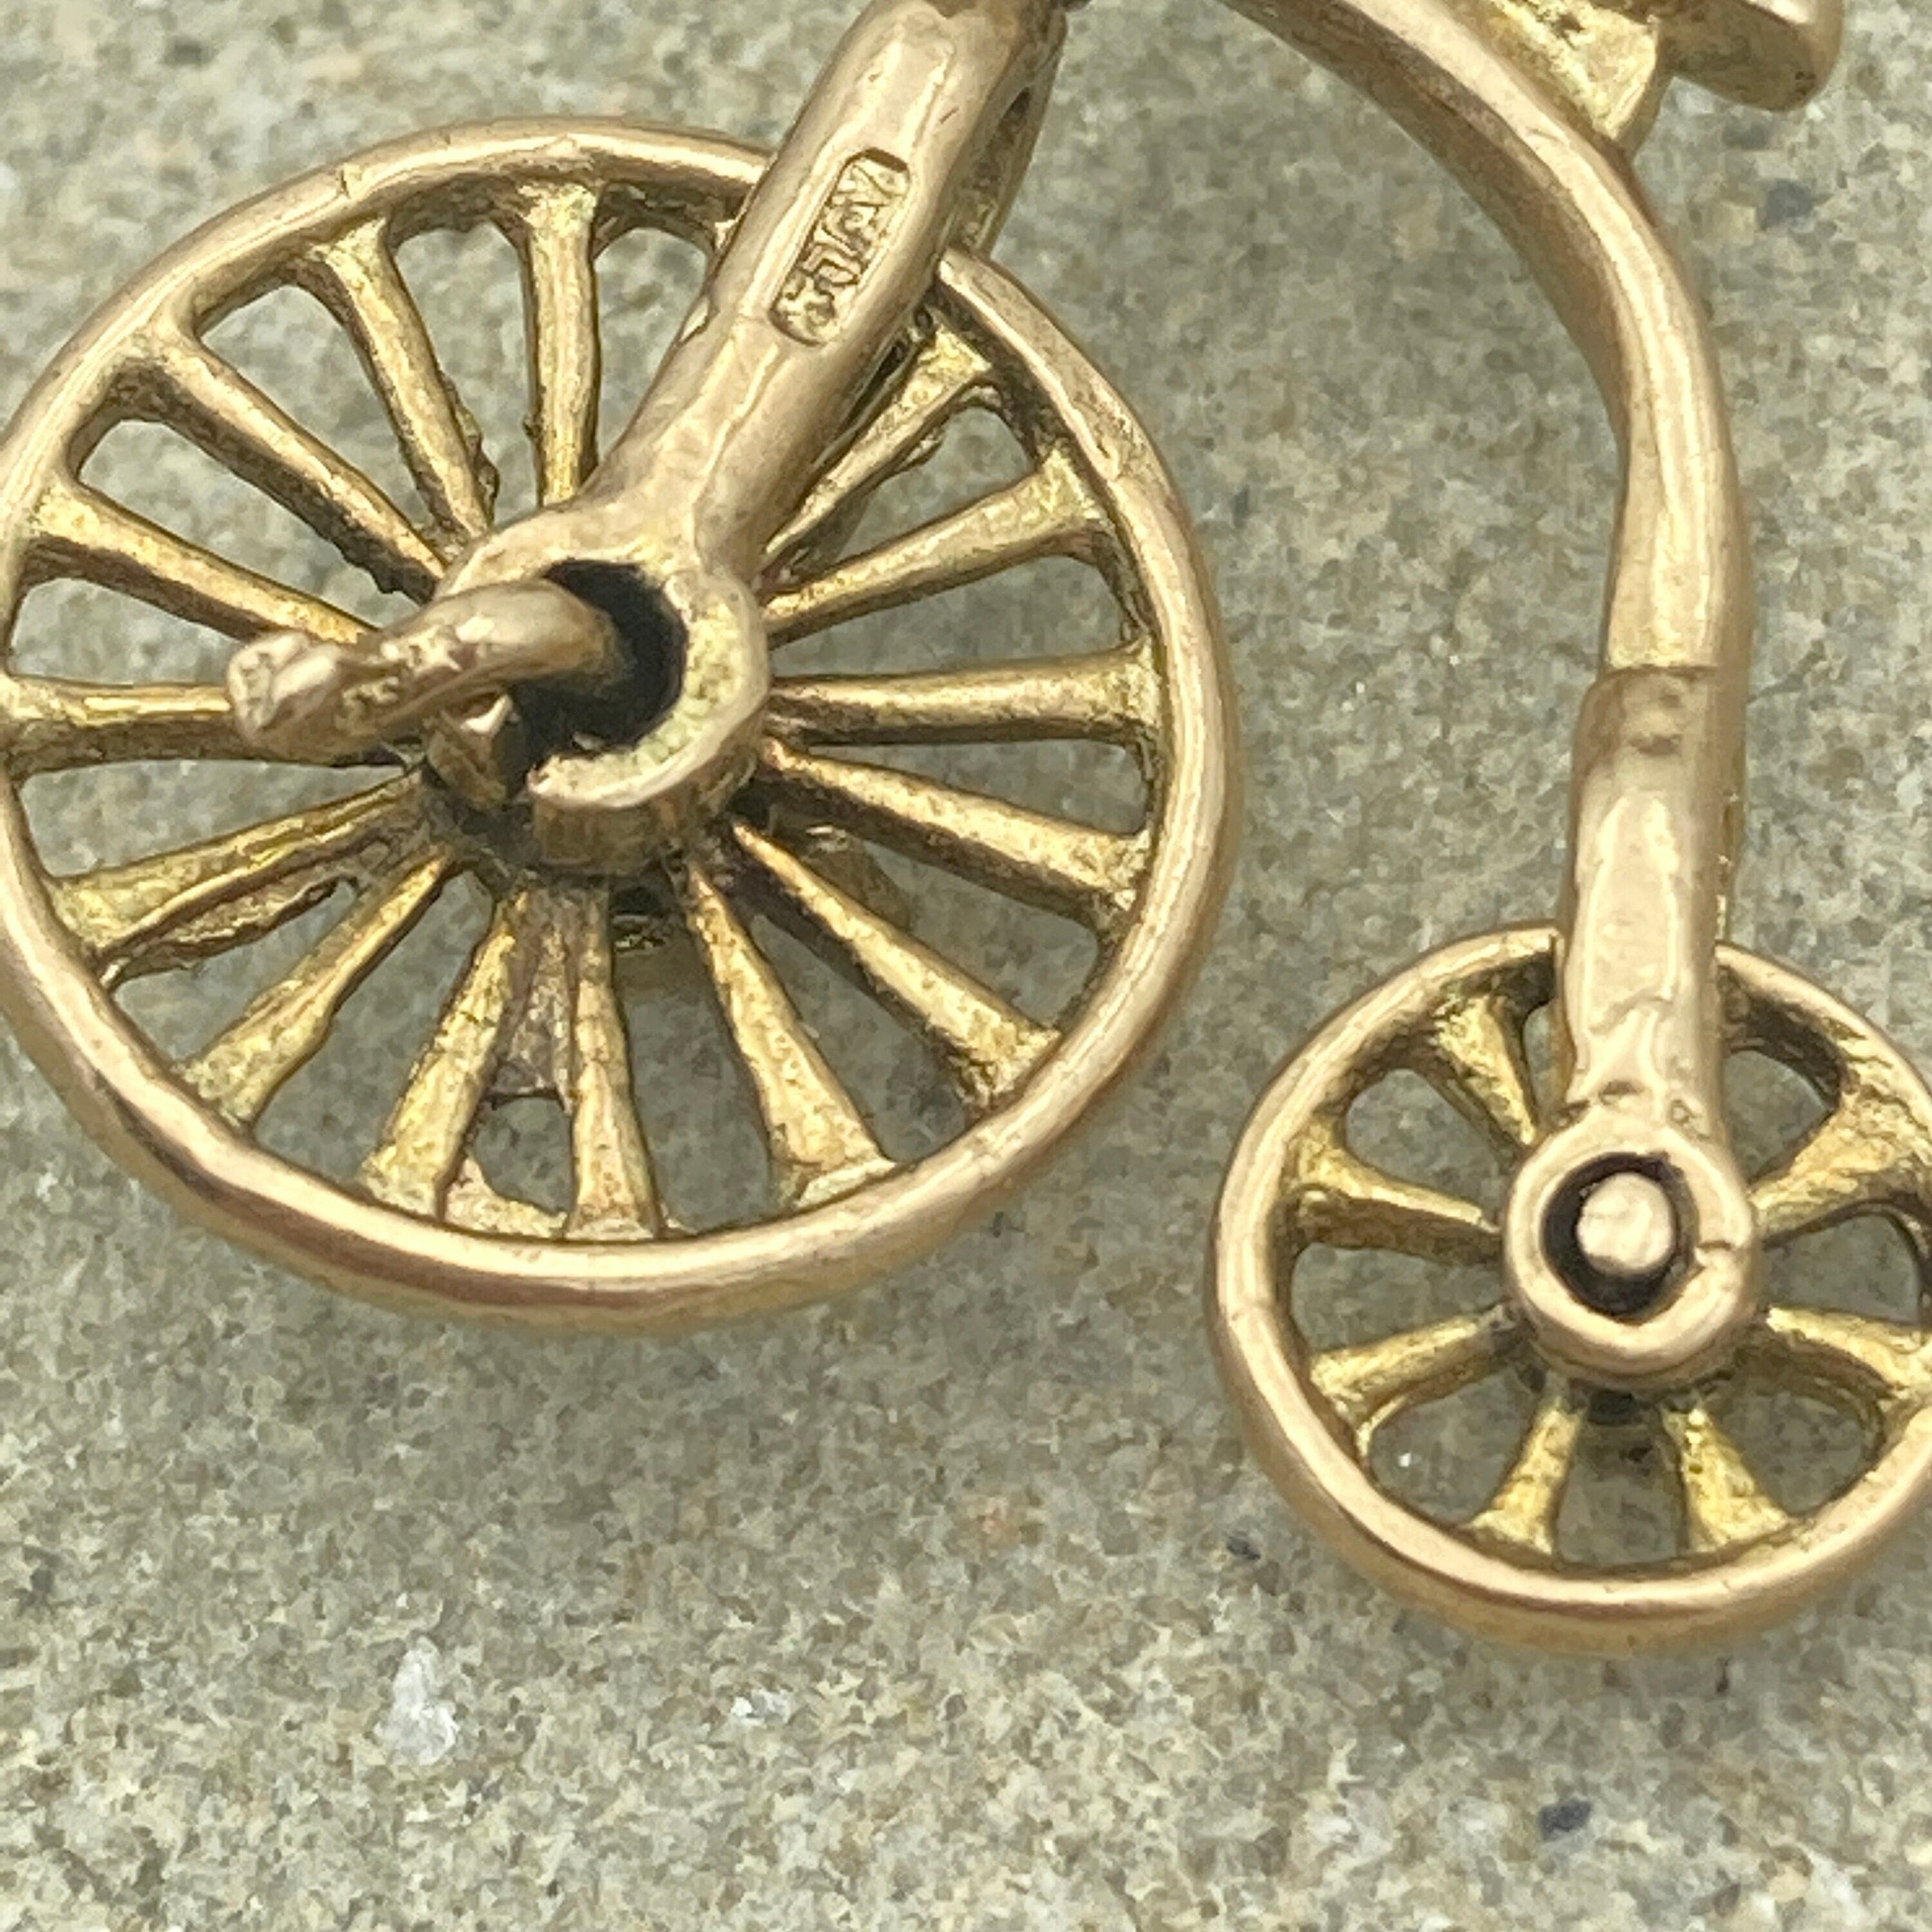 Vintage solid 9ct gold penny farthing bicycle charm / pendant hallmarked london 1963 9k gold 3d charm